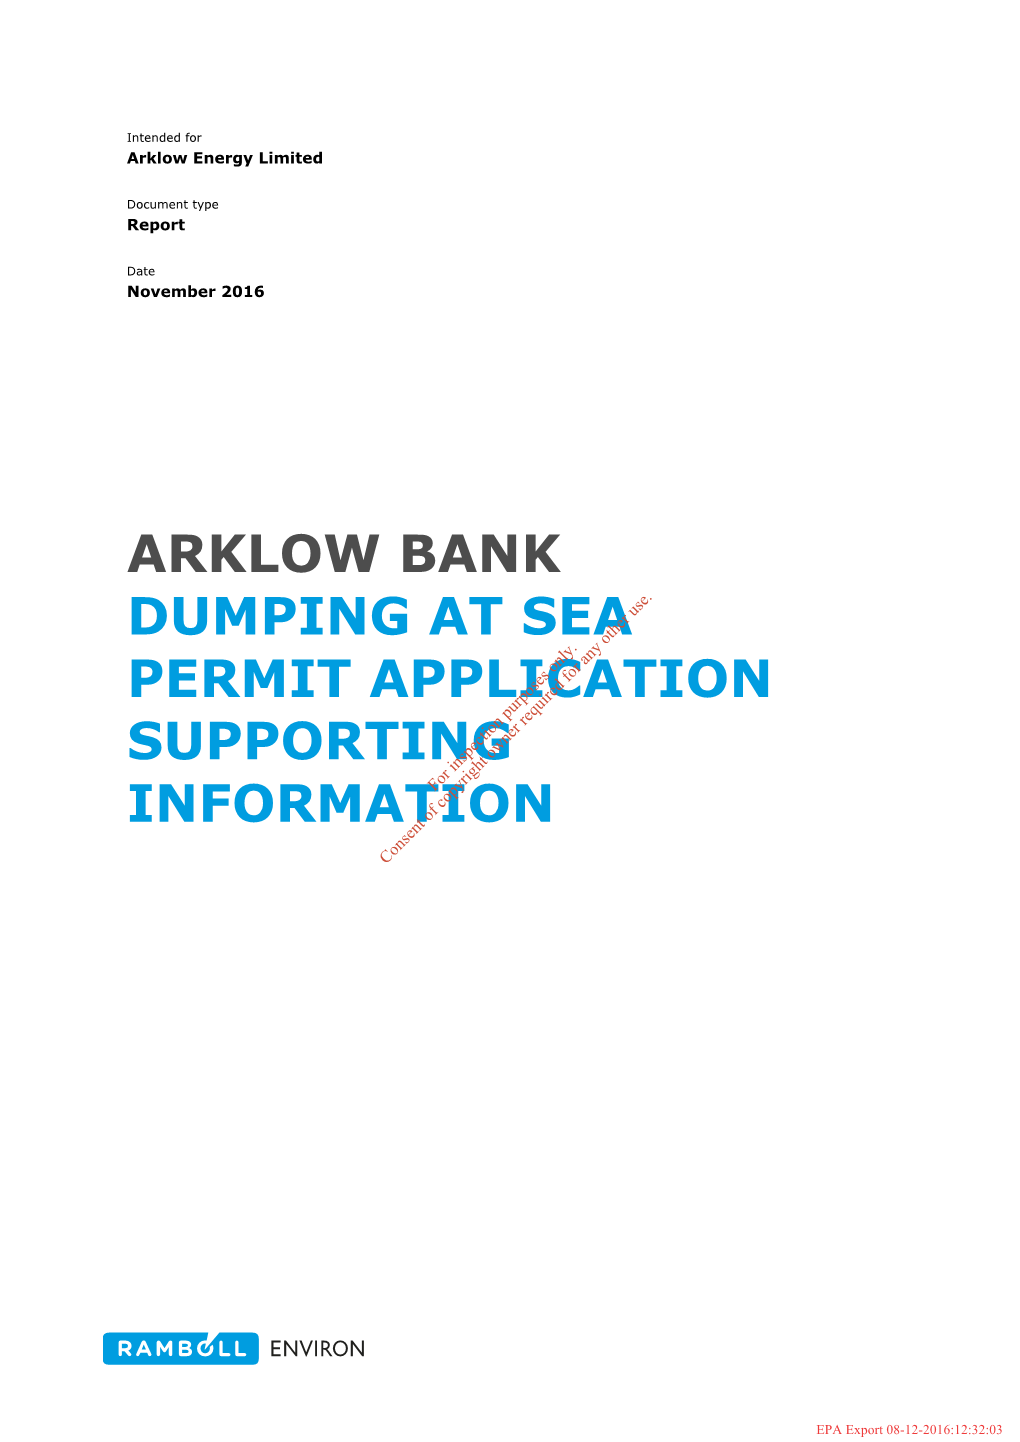 ARKLOW BANK DUMPING at SEA PERMIT APPLICATION SUPPORTING INFORMATION for Inspection Purposes Only